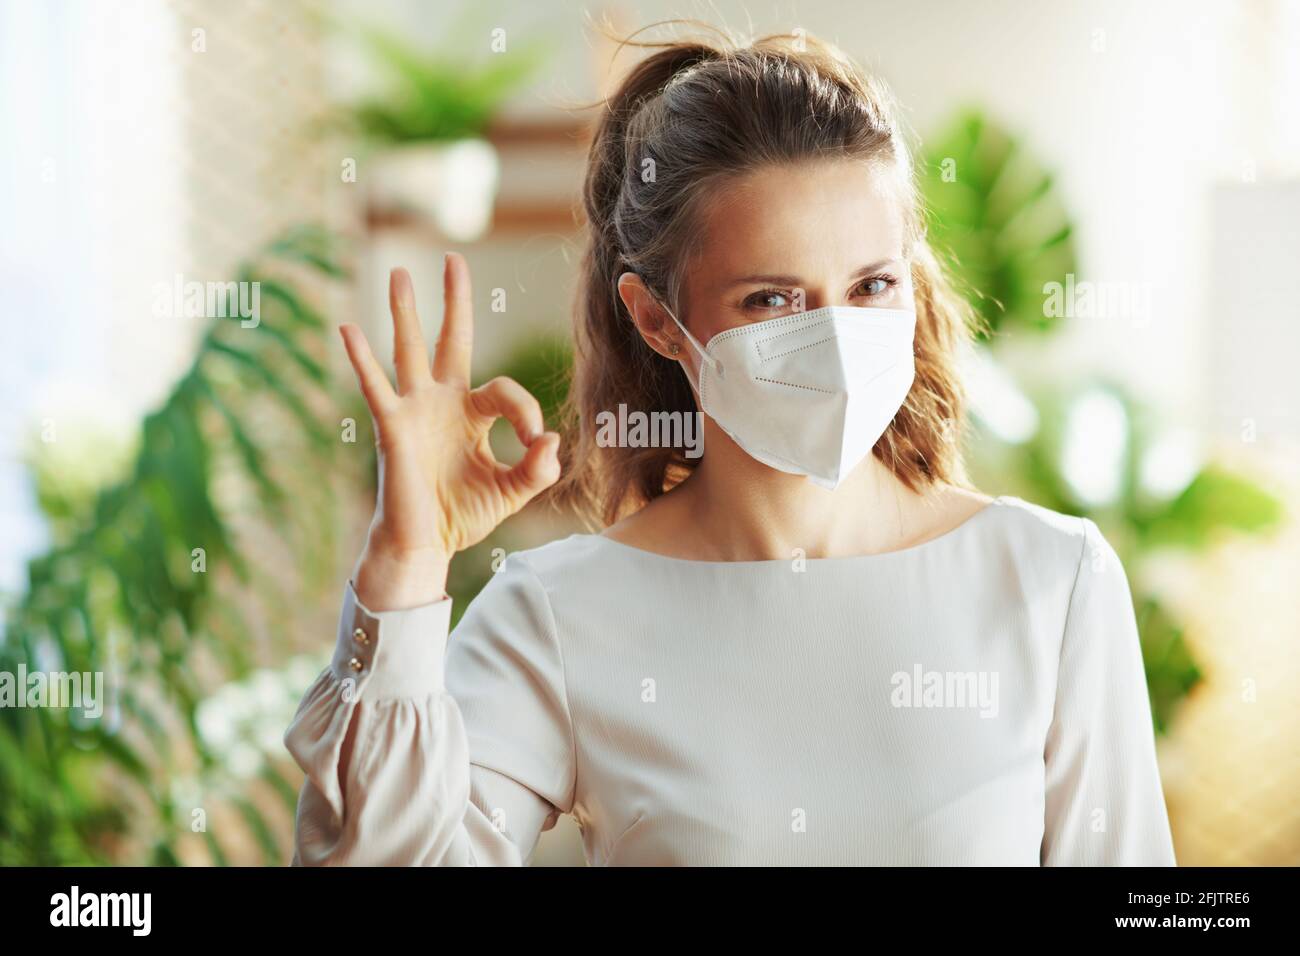 coronavirus pandemic. happy young woman in grey blouse with ffp2 mask showing ok gesture. Stock Photo